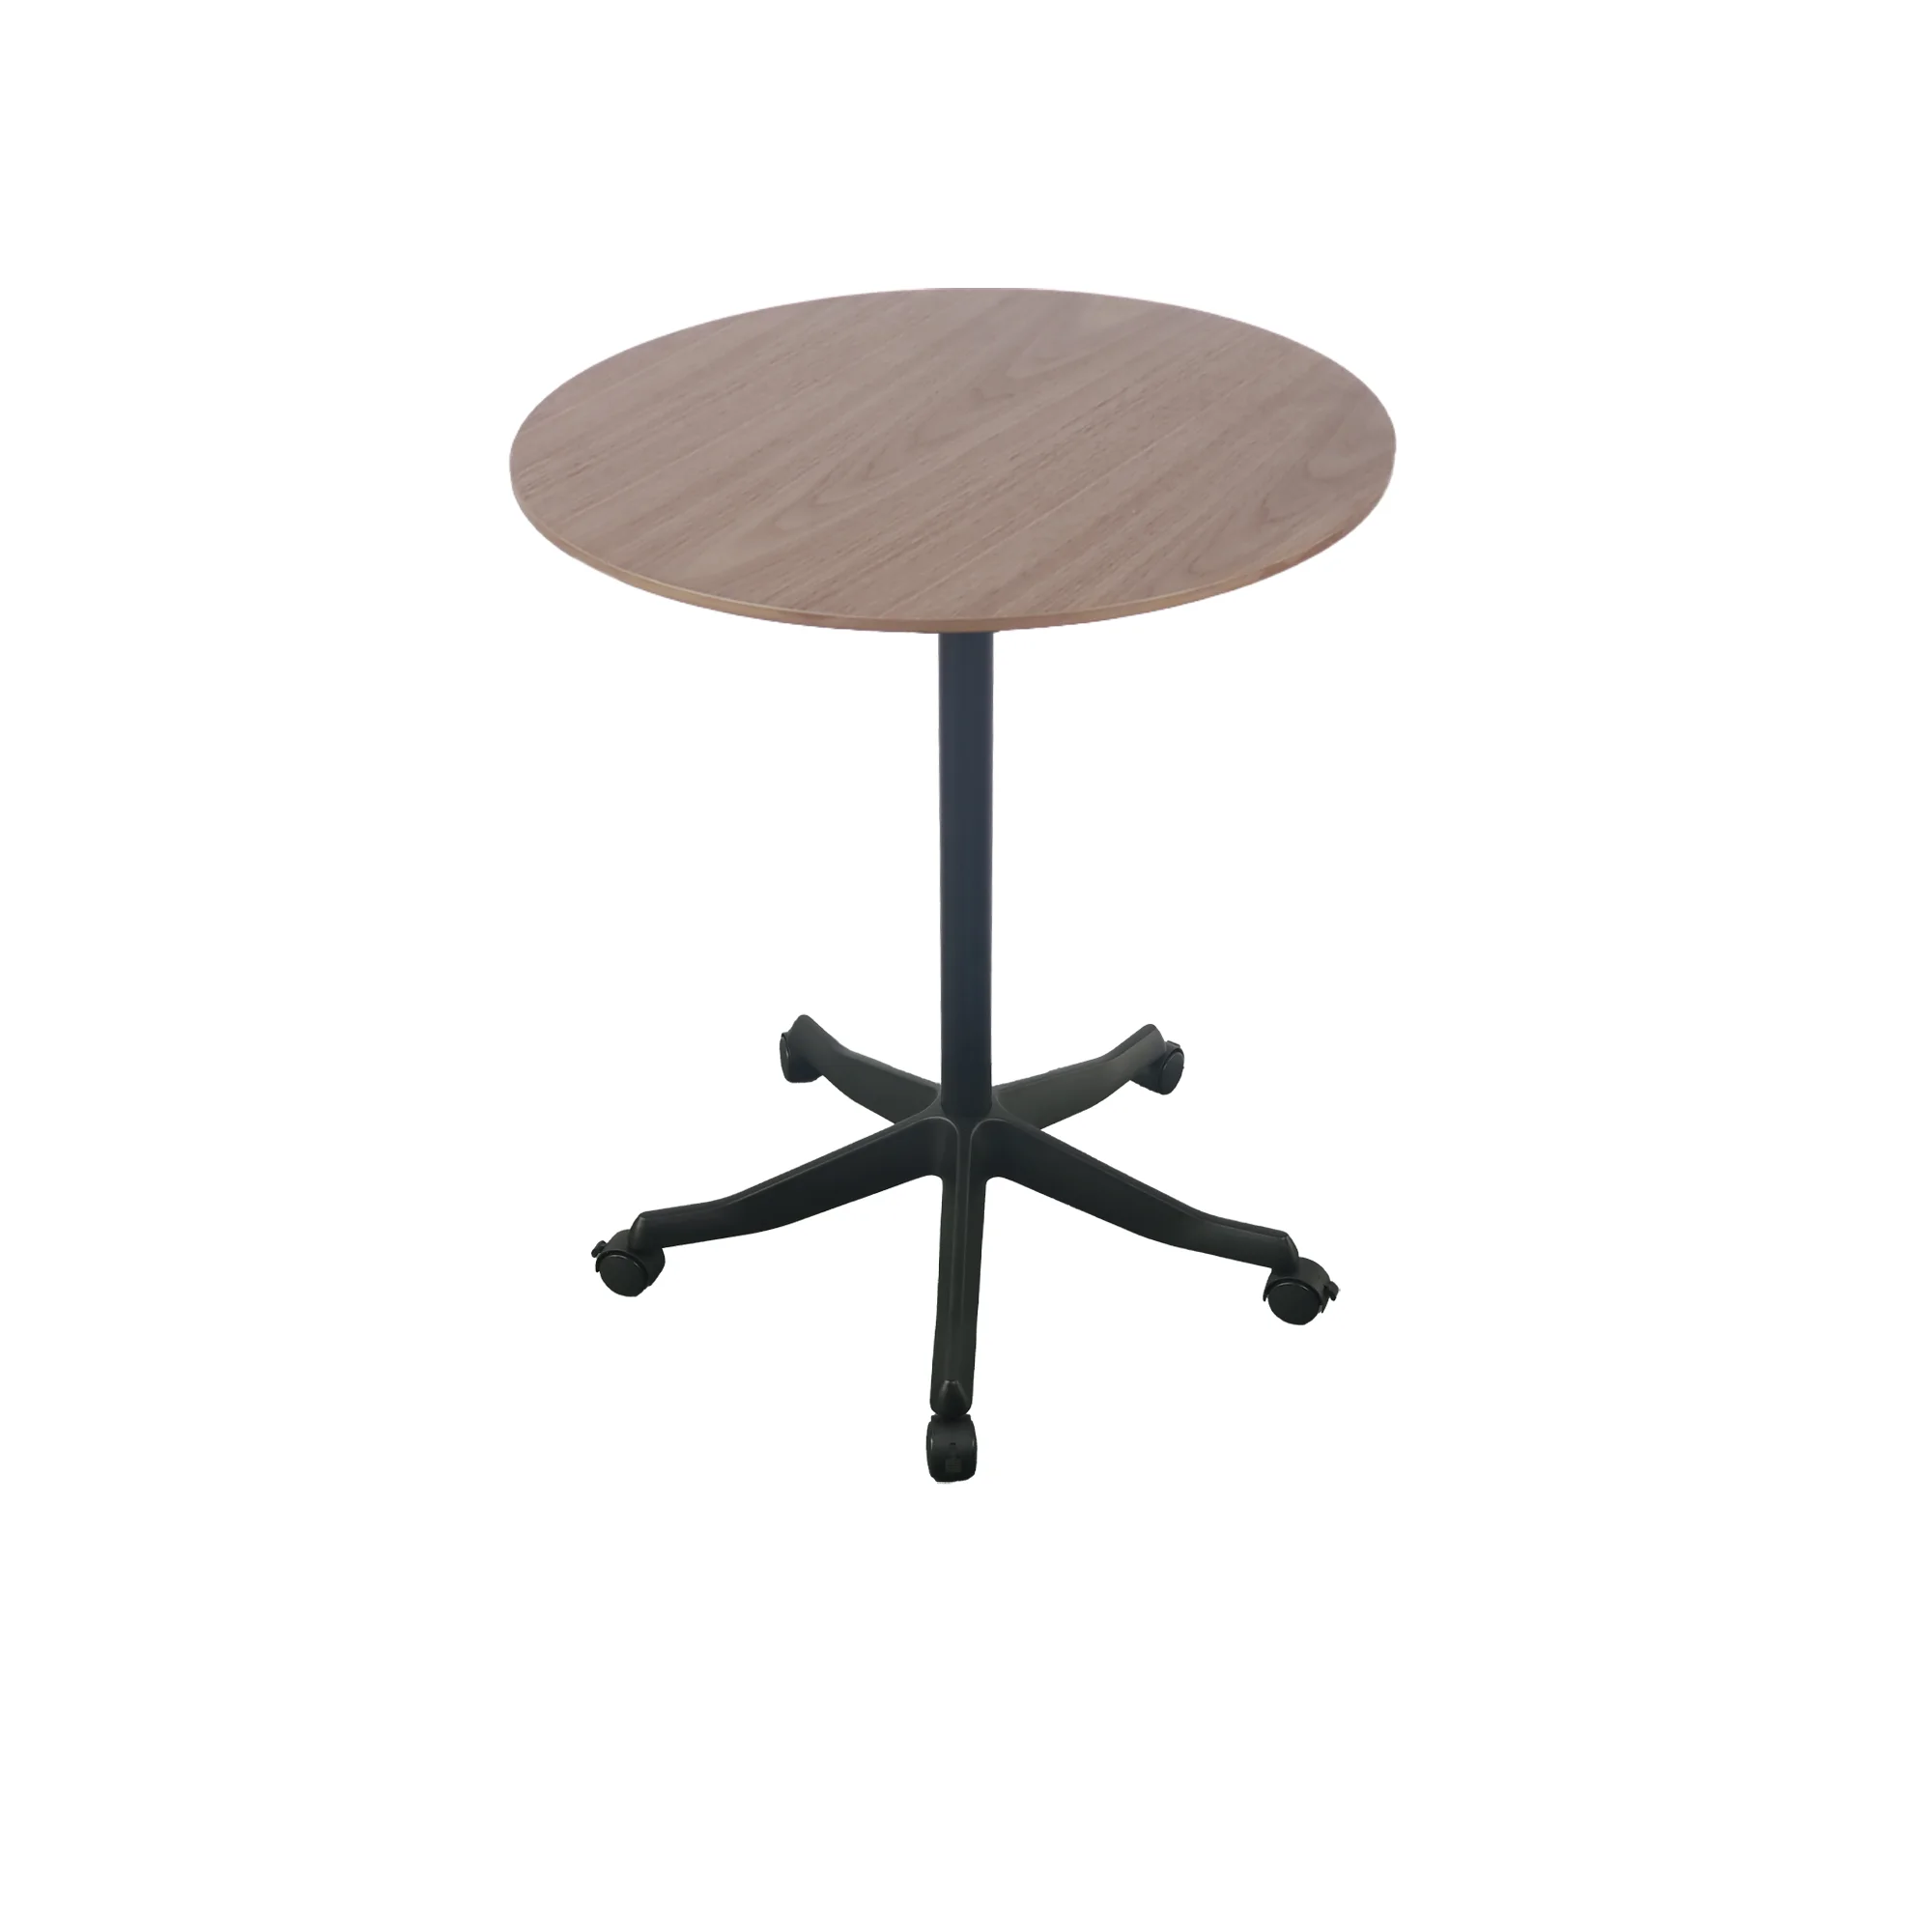 Mobile wooden round table Mobile desk Mobile coffee table Mobile round table